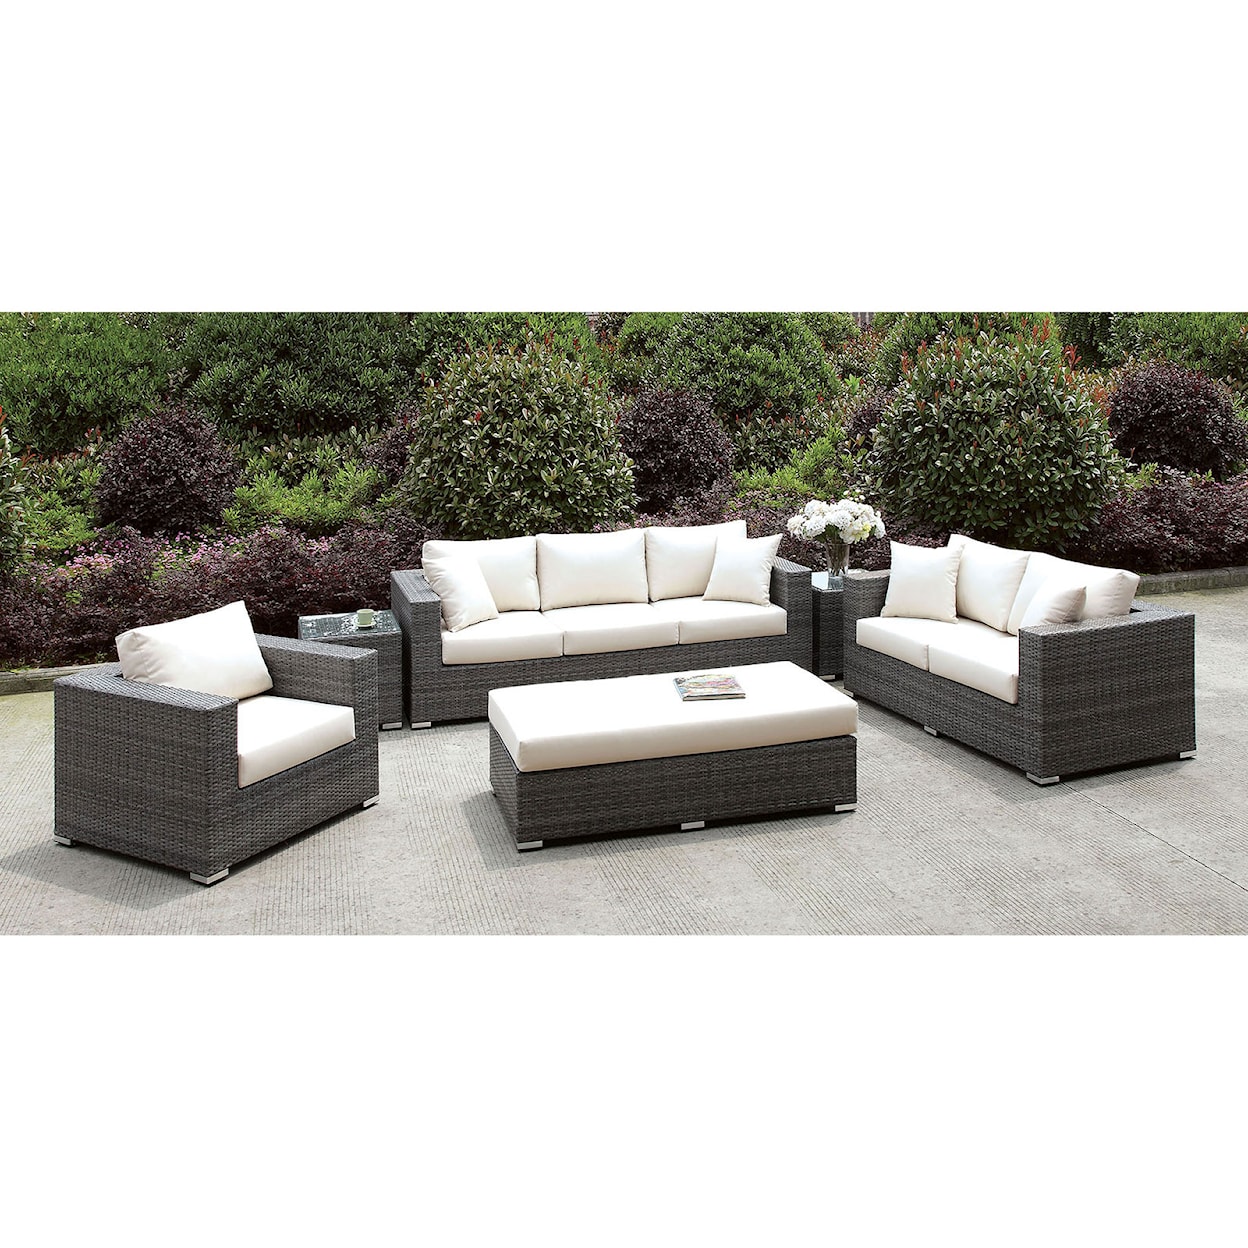 Furniture of America Somani 3 Pc Set + Bench + 2 End Tables